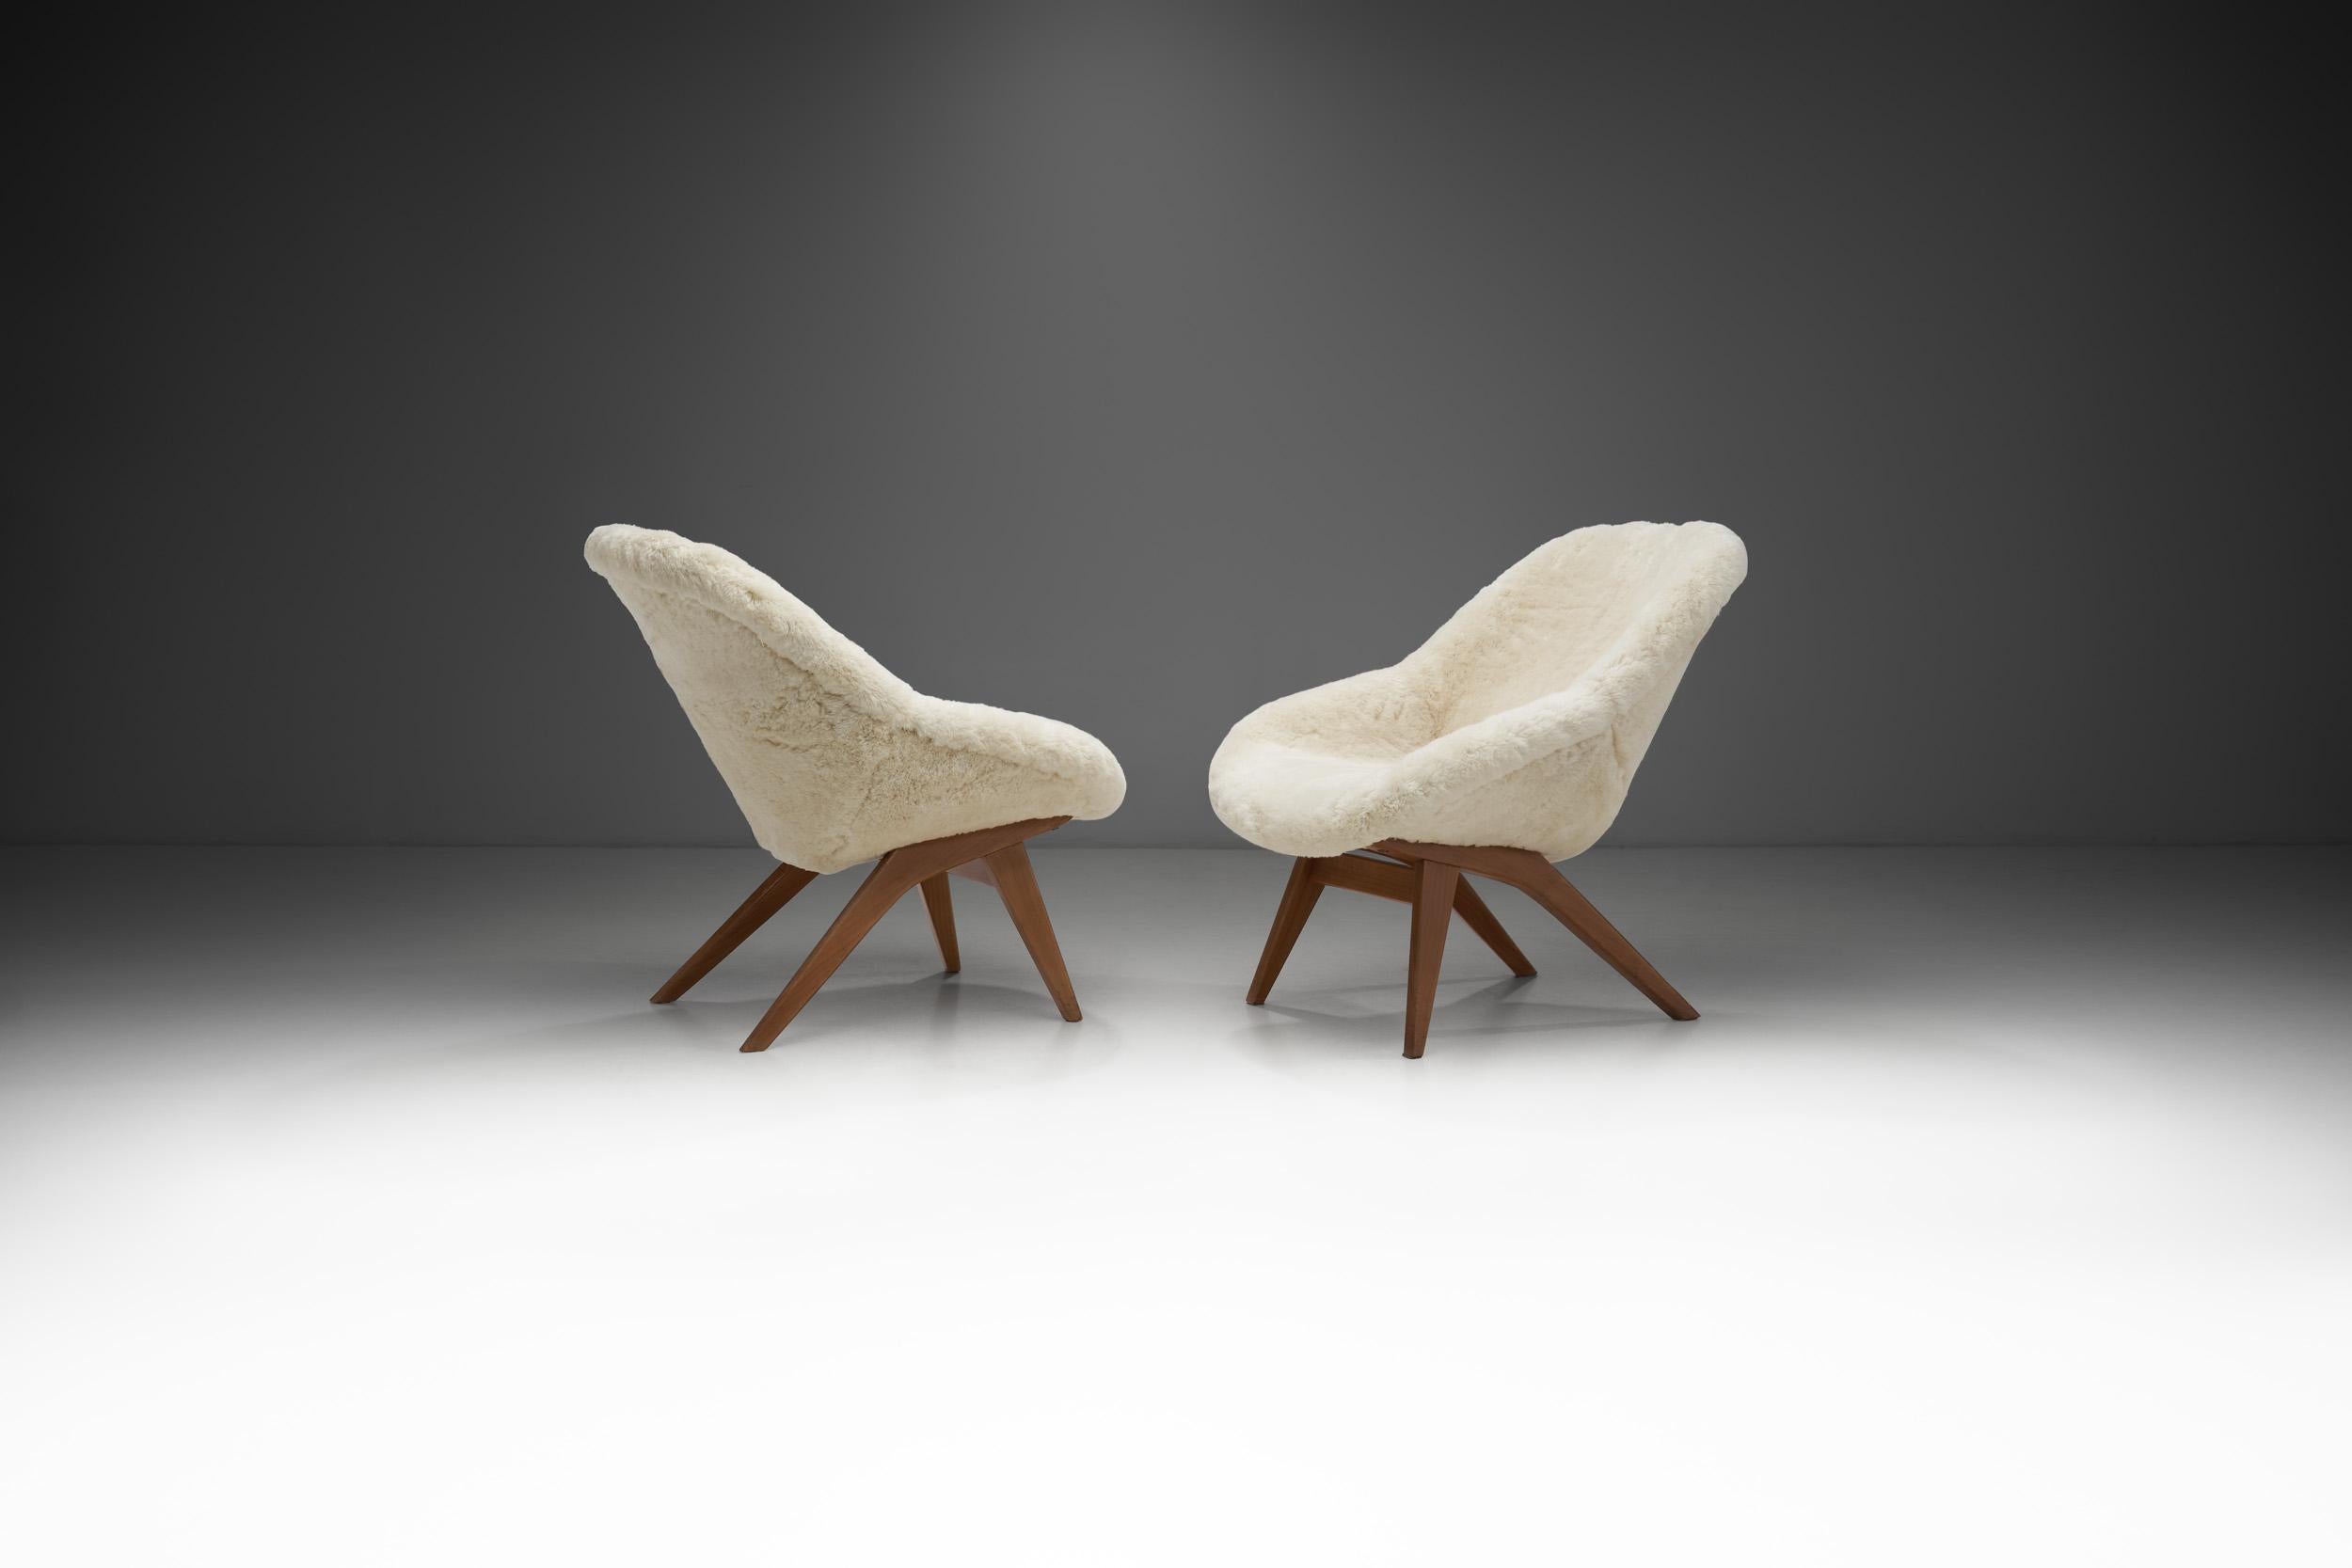 These cosy lounge chairs show the homely curviness that defined the design of the 1950s around Europe. This pair of mid-century chairs revolves around high-quality materials, comfort, and the mastery of European cabinetmakers.

This pair has a